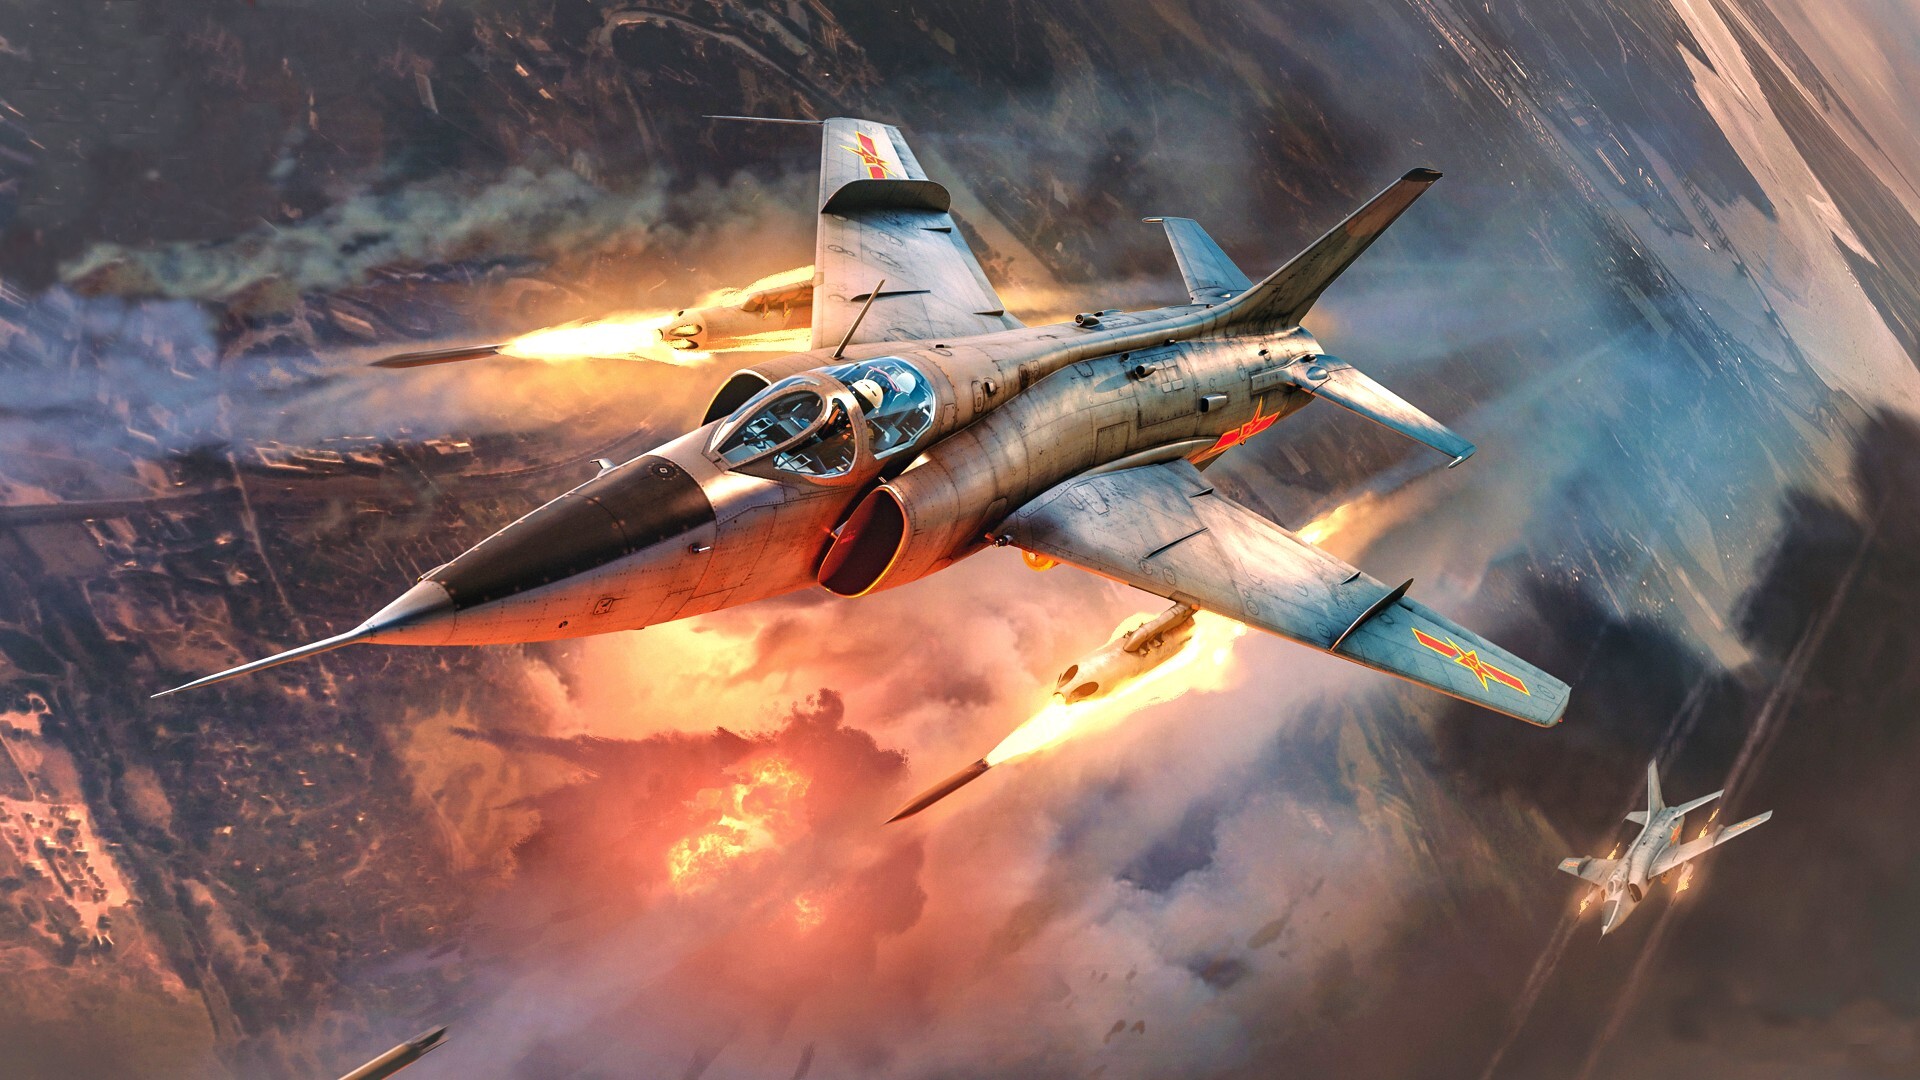 War Thunder needs you! Sign up for free and get a premium vehicle